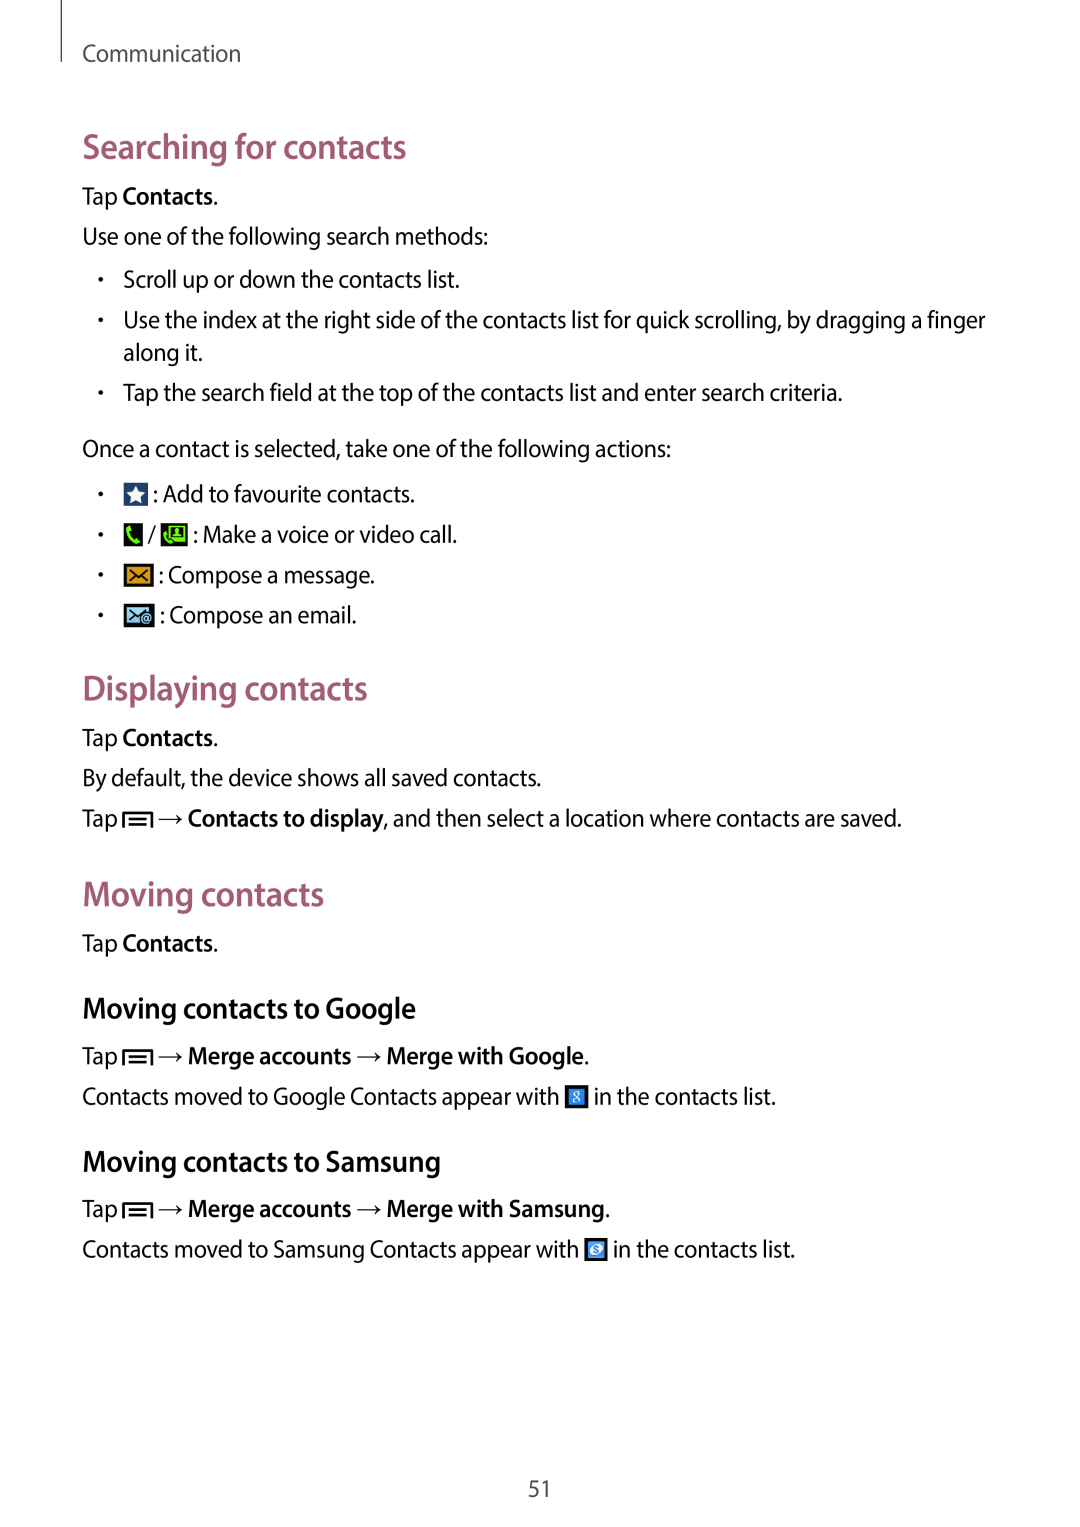 Samsung SM-G7105ZBAFTM manual Searching for contacts, Displaying contacts, Moving contacts to Google, Communication 